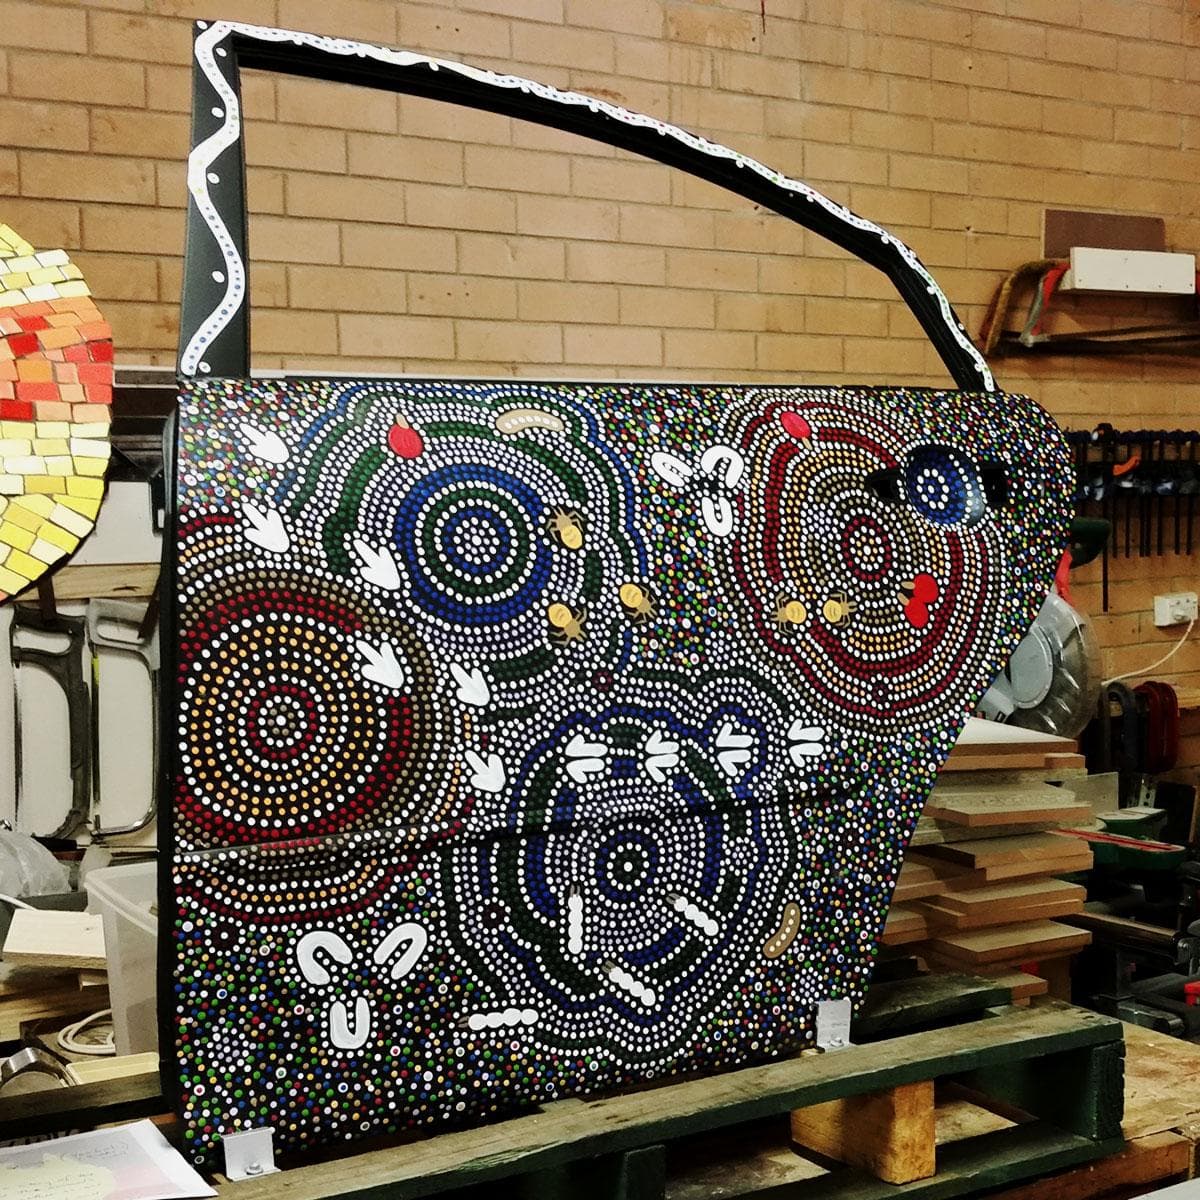 Wooden car door panel with Indigenous dot art painted on the side